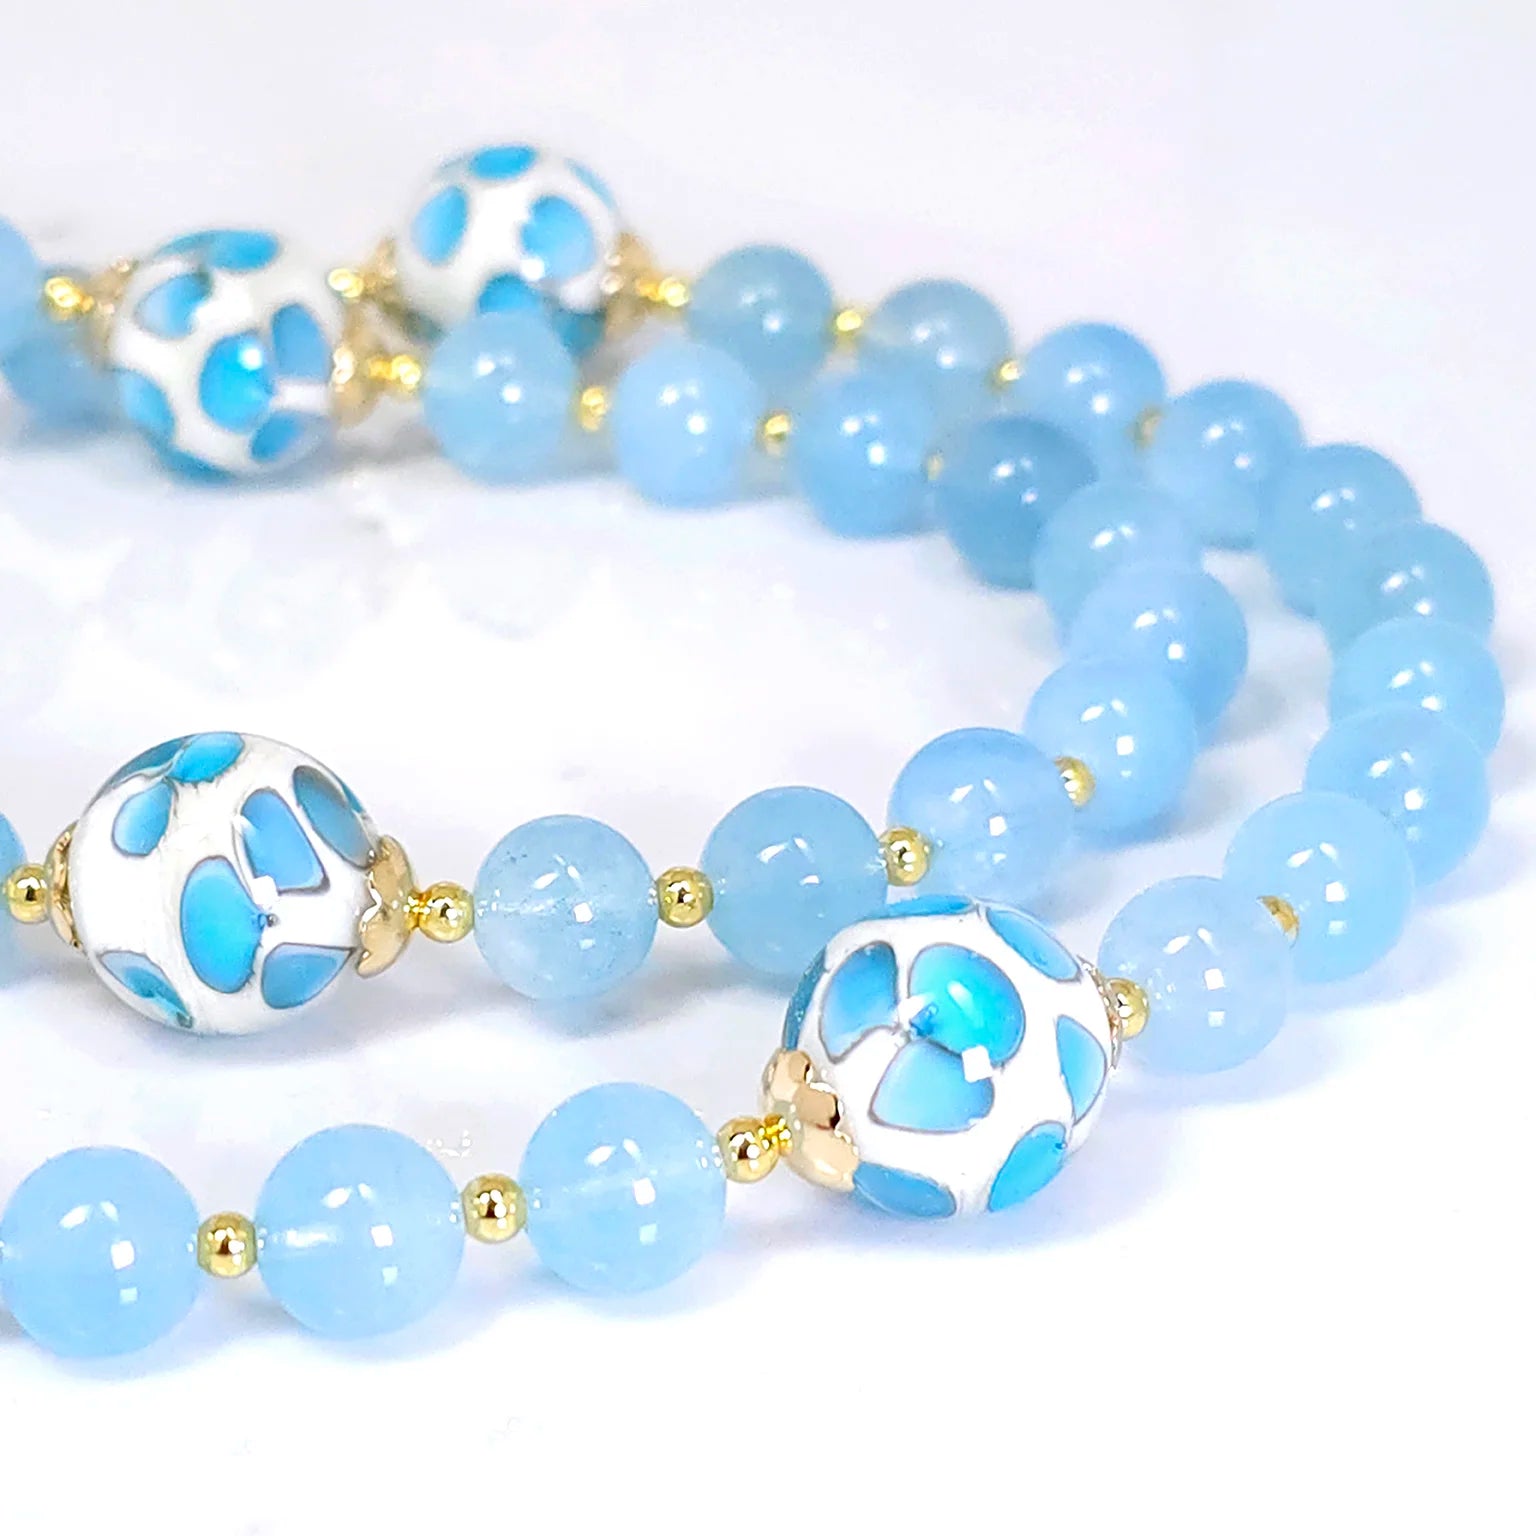 Detailed view of rosary beads crafted from Blue Aquamarine with gold-filled round wire, showcased on a white table.